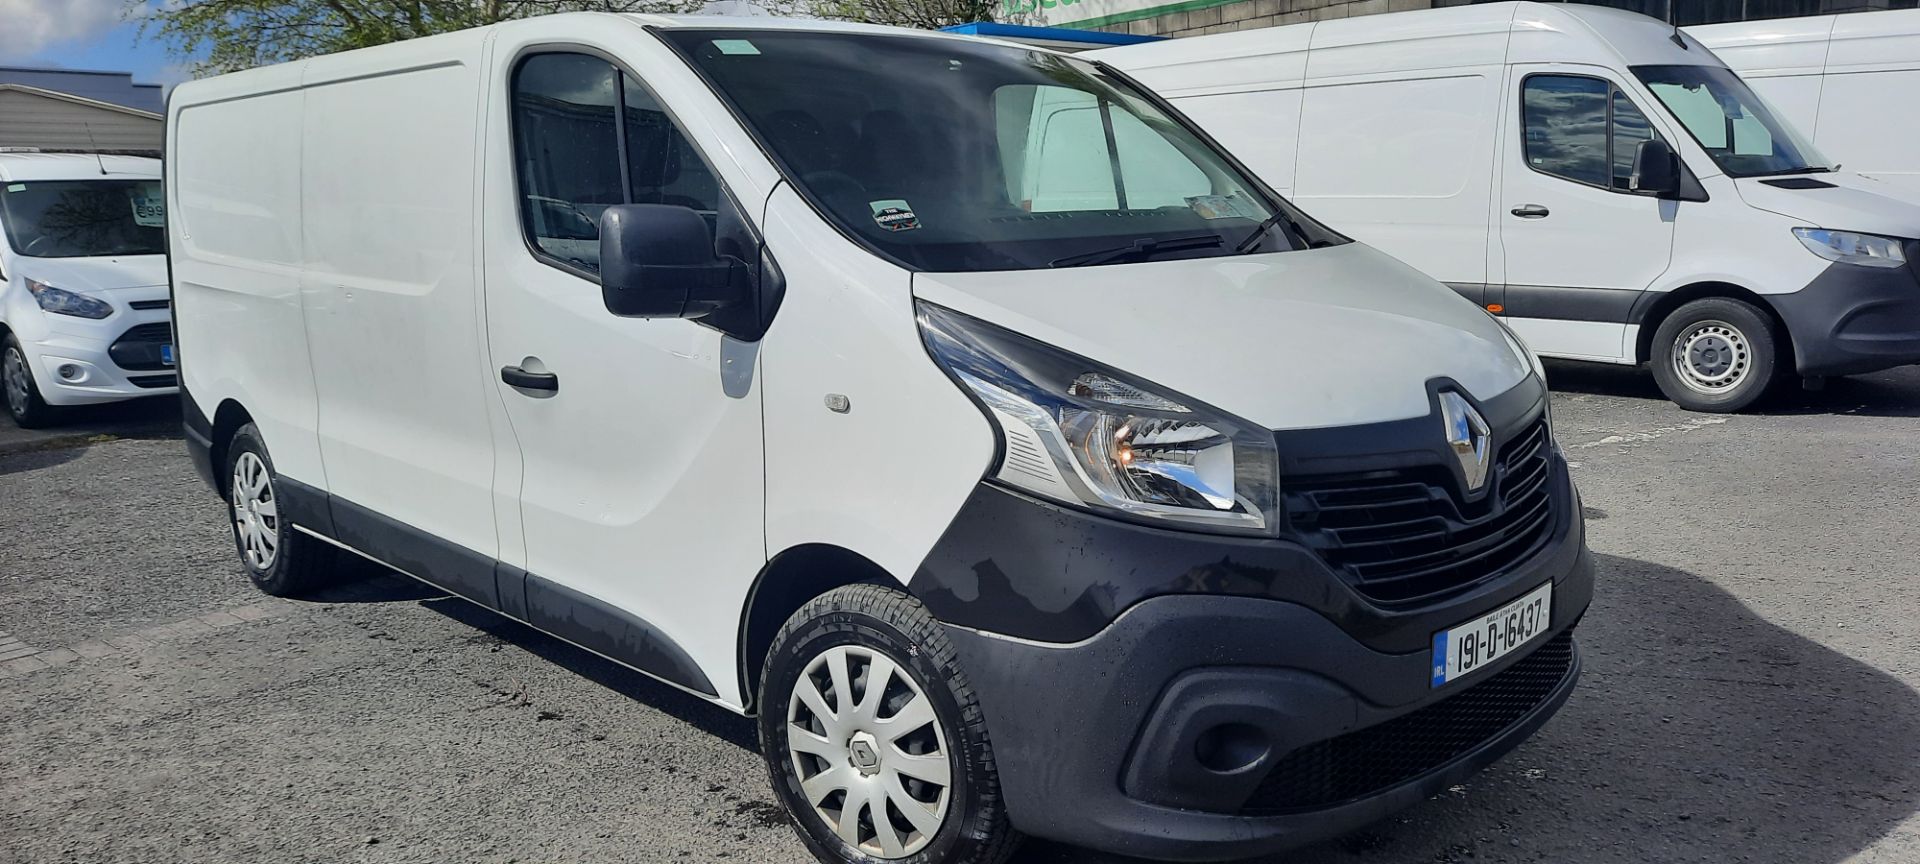 2019 Renault Trafic LL29 DCI 120 Business (191D16437) Image 1